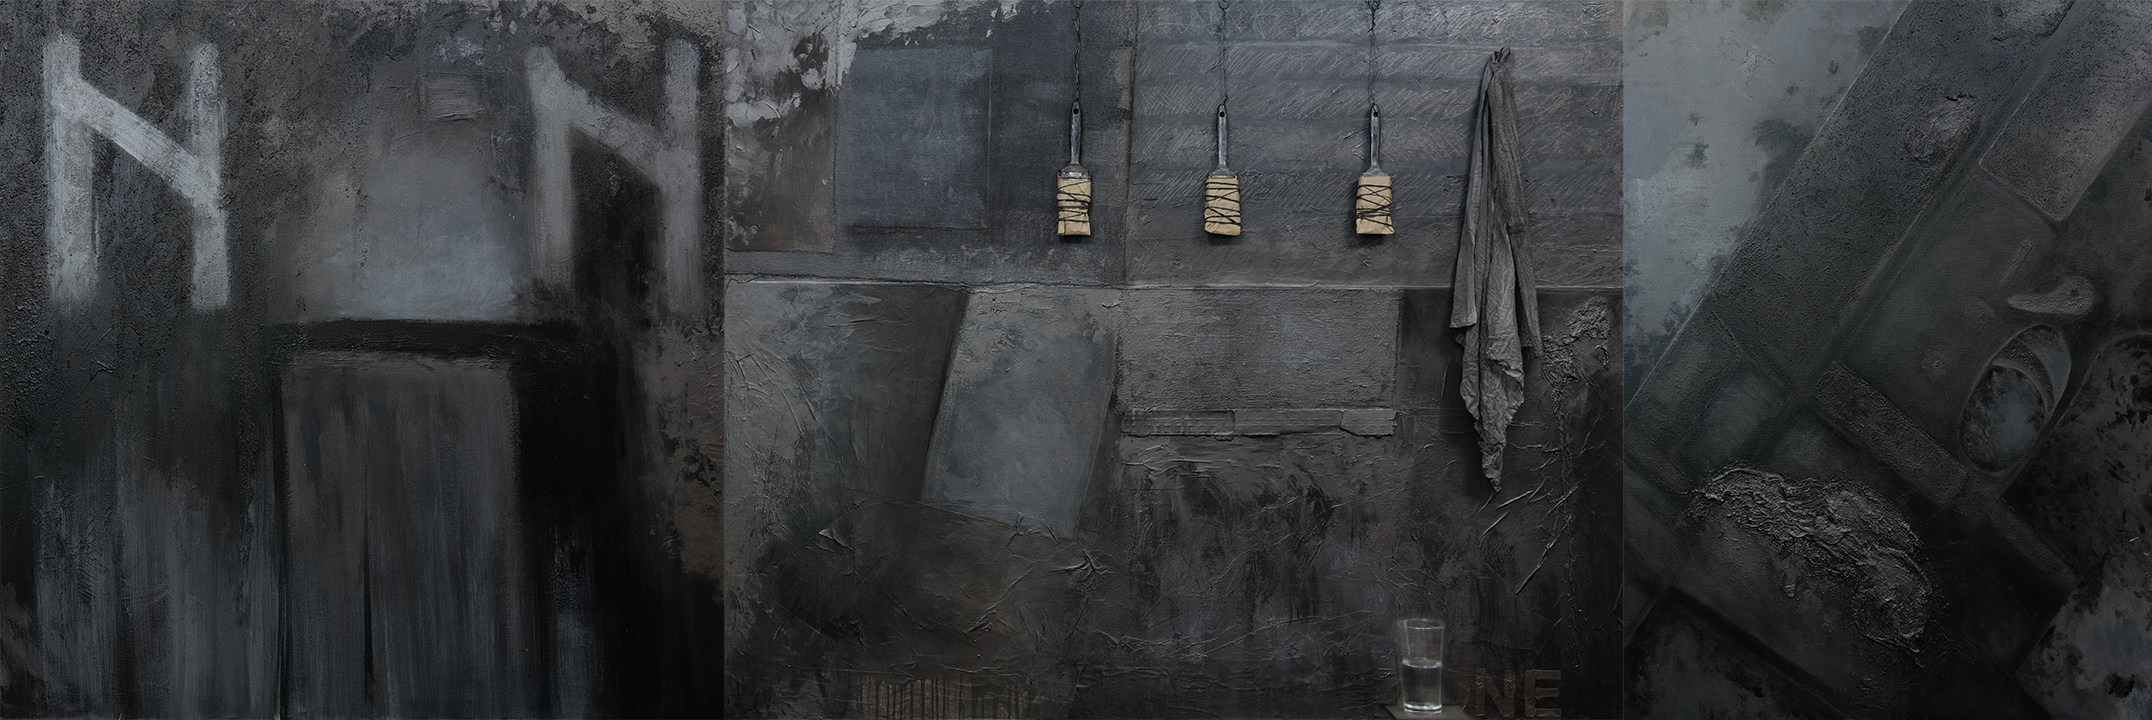 Zone (Via Negativa, triptych 5), 2022, oil, acrylic, graphite, charcoal and objects on canvas, 48" x 144"